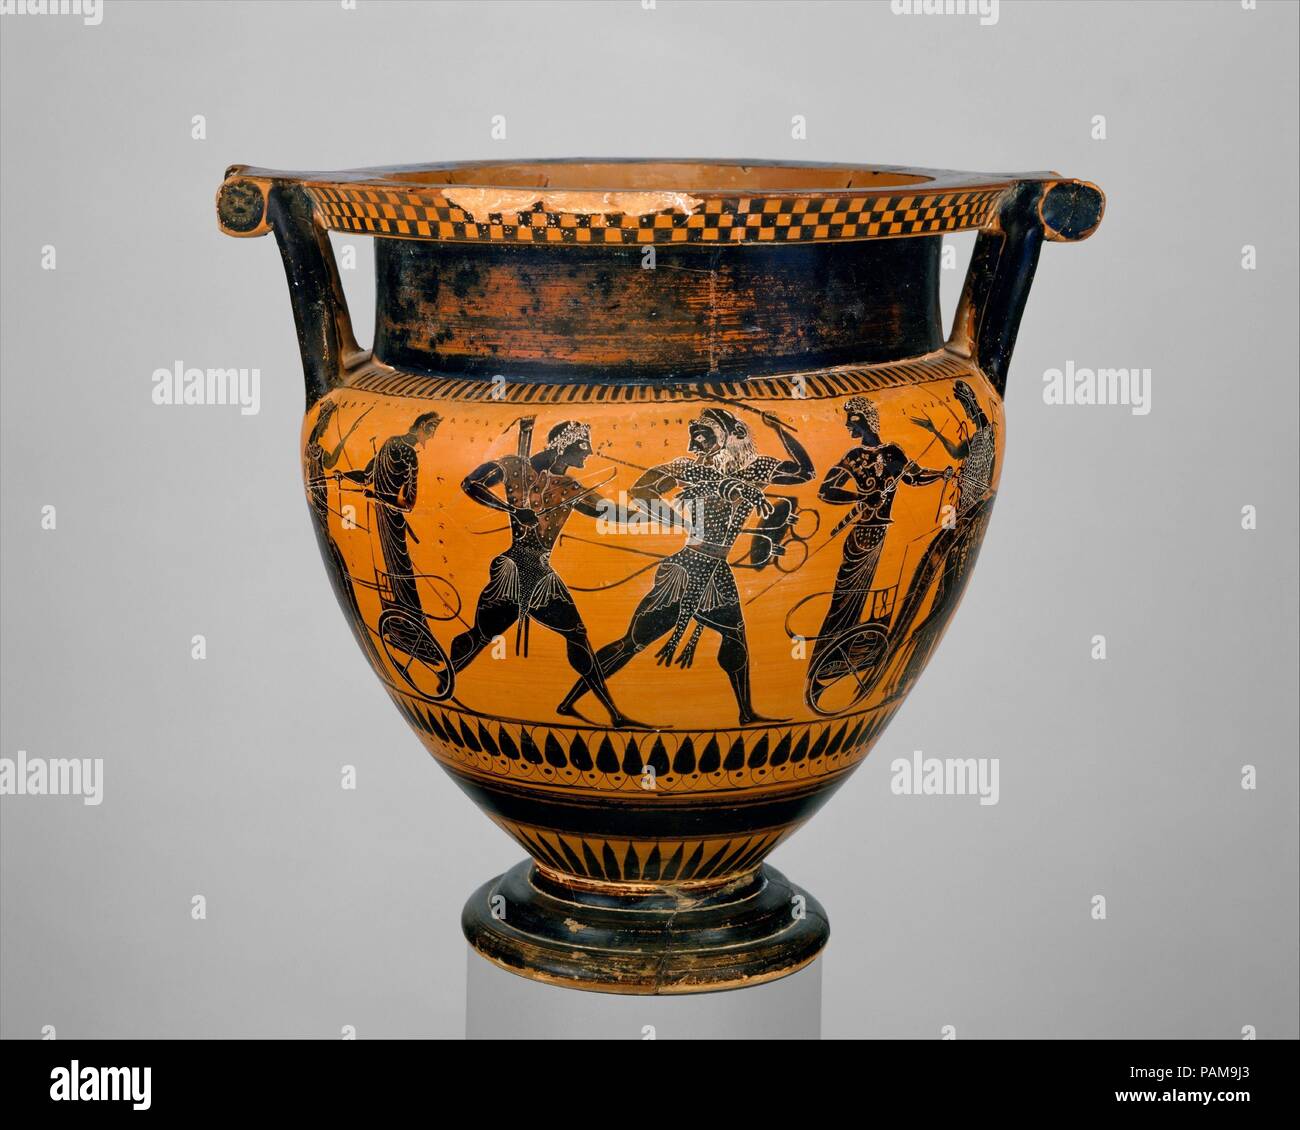 Terracotta column-krater (bowl for mixing wine and water). Culture: Greek, Attic. Dimensions: H. 13 in. (33 cm)  diameter  14 1/2 in. (36.8 cm). Date: ca. 520-510 B.C..  Within the mouth, ships and dolphins  On the body, obverse, the struggle between Herakles and Apollo for the Delphic tripod; reverse, onlookers  Representations of Herakles' attempt to seize the tripod from the oracle of Apollo at Delphi were popular in Attic vase-painting from the end of the sixth century B.C. to the mid-fifth. In addition to featuring the local hero, Herakles, they afforded artists the opportunity to depict  Stock Photo